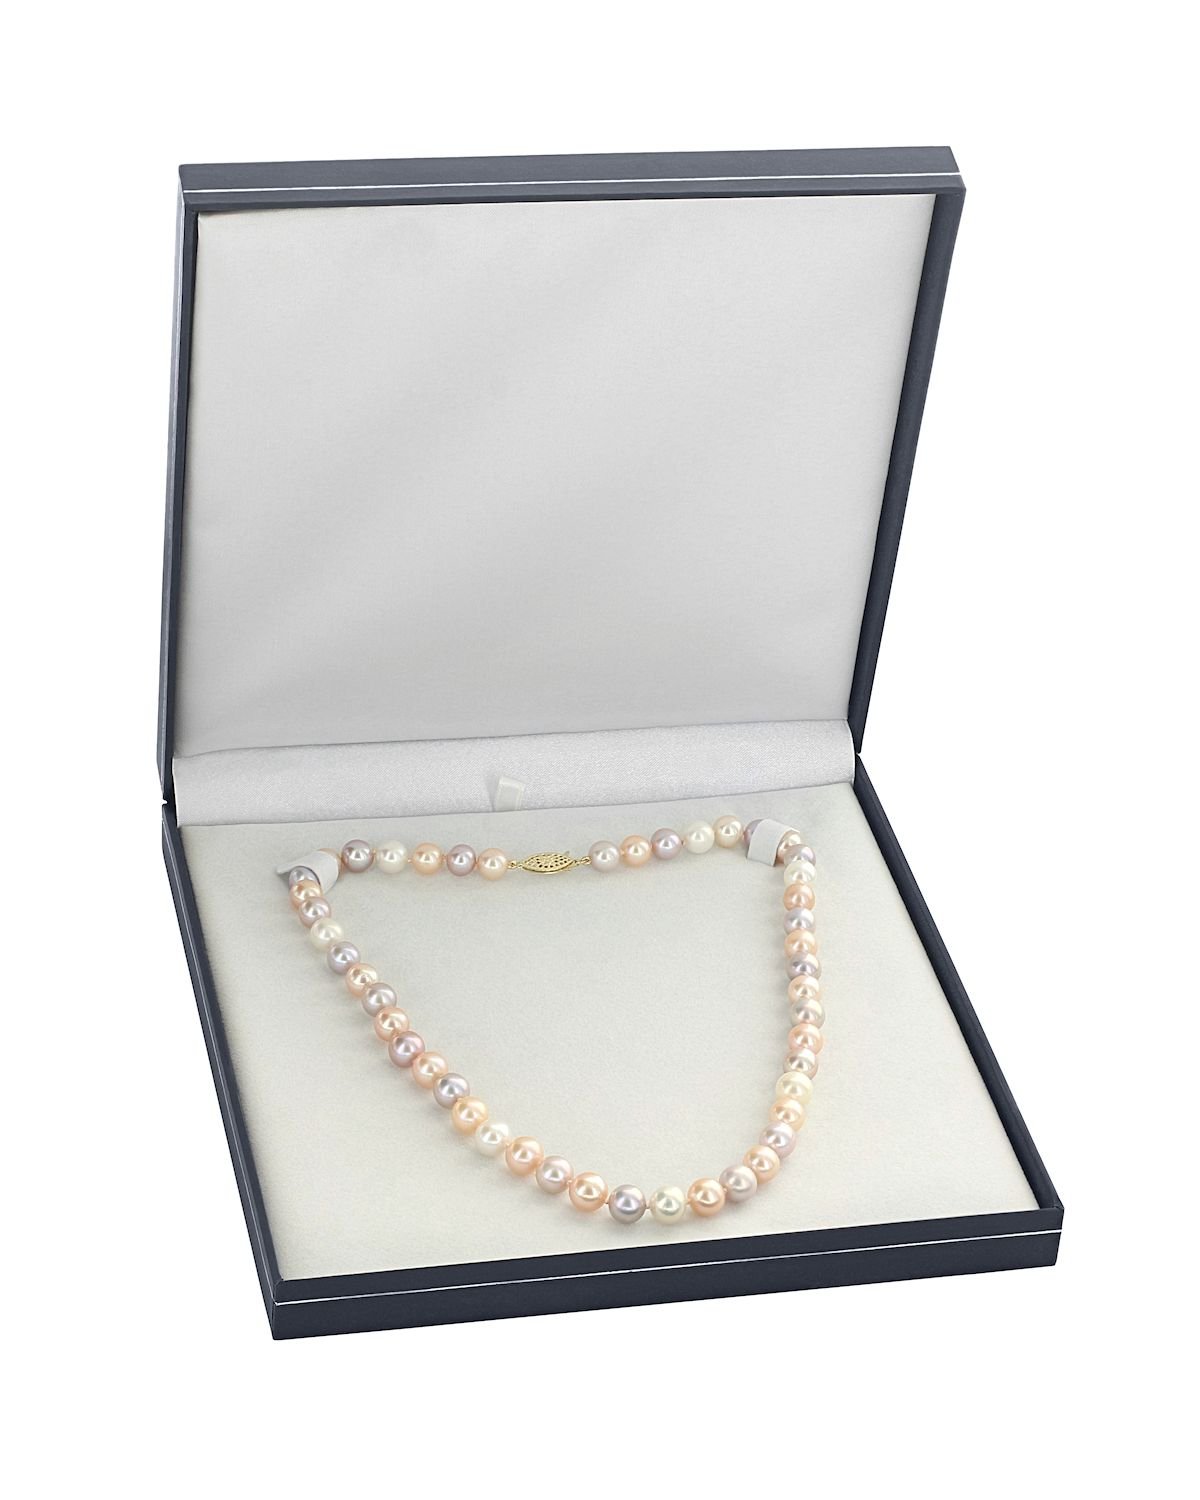 7.0-7.5mm Freshwater Multicolor Pearl Necklace - AAA Quality - Third Image